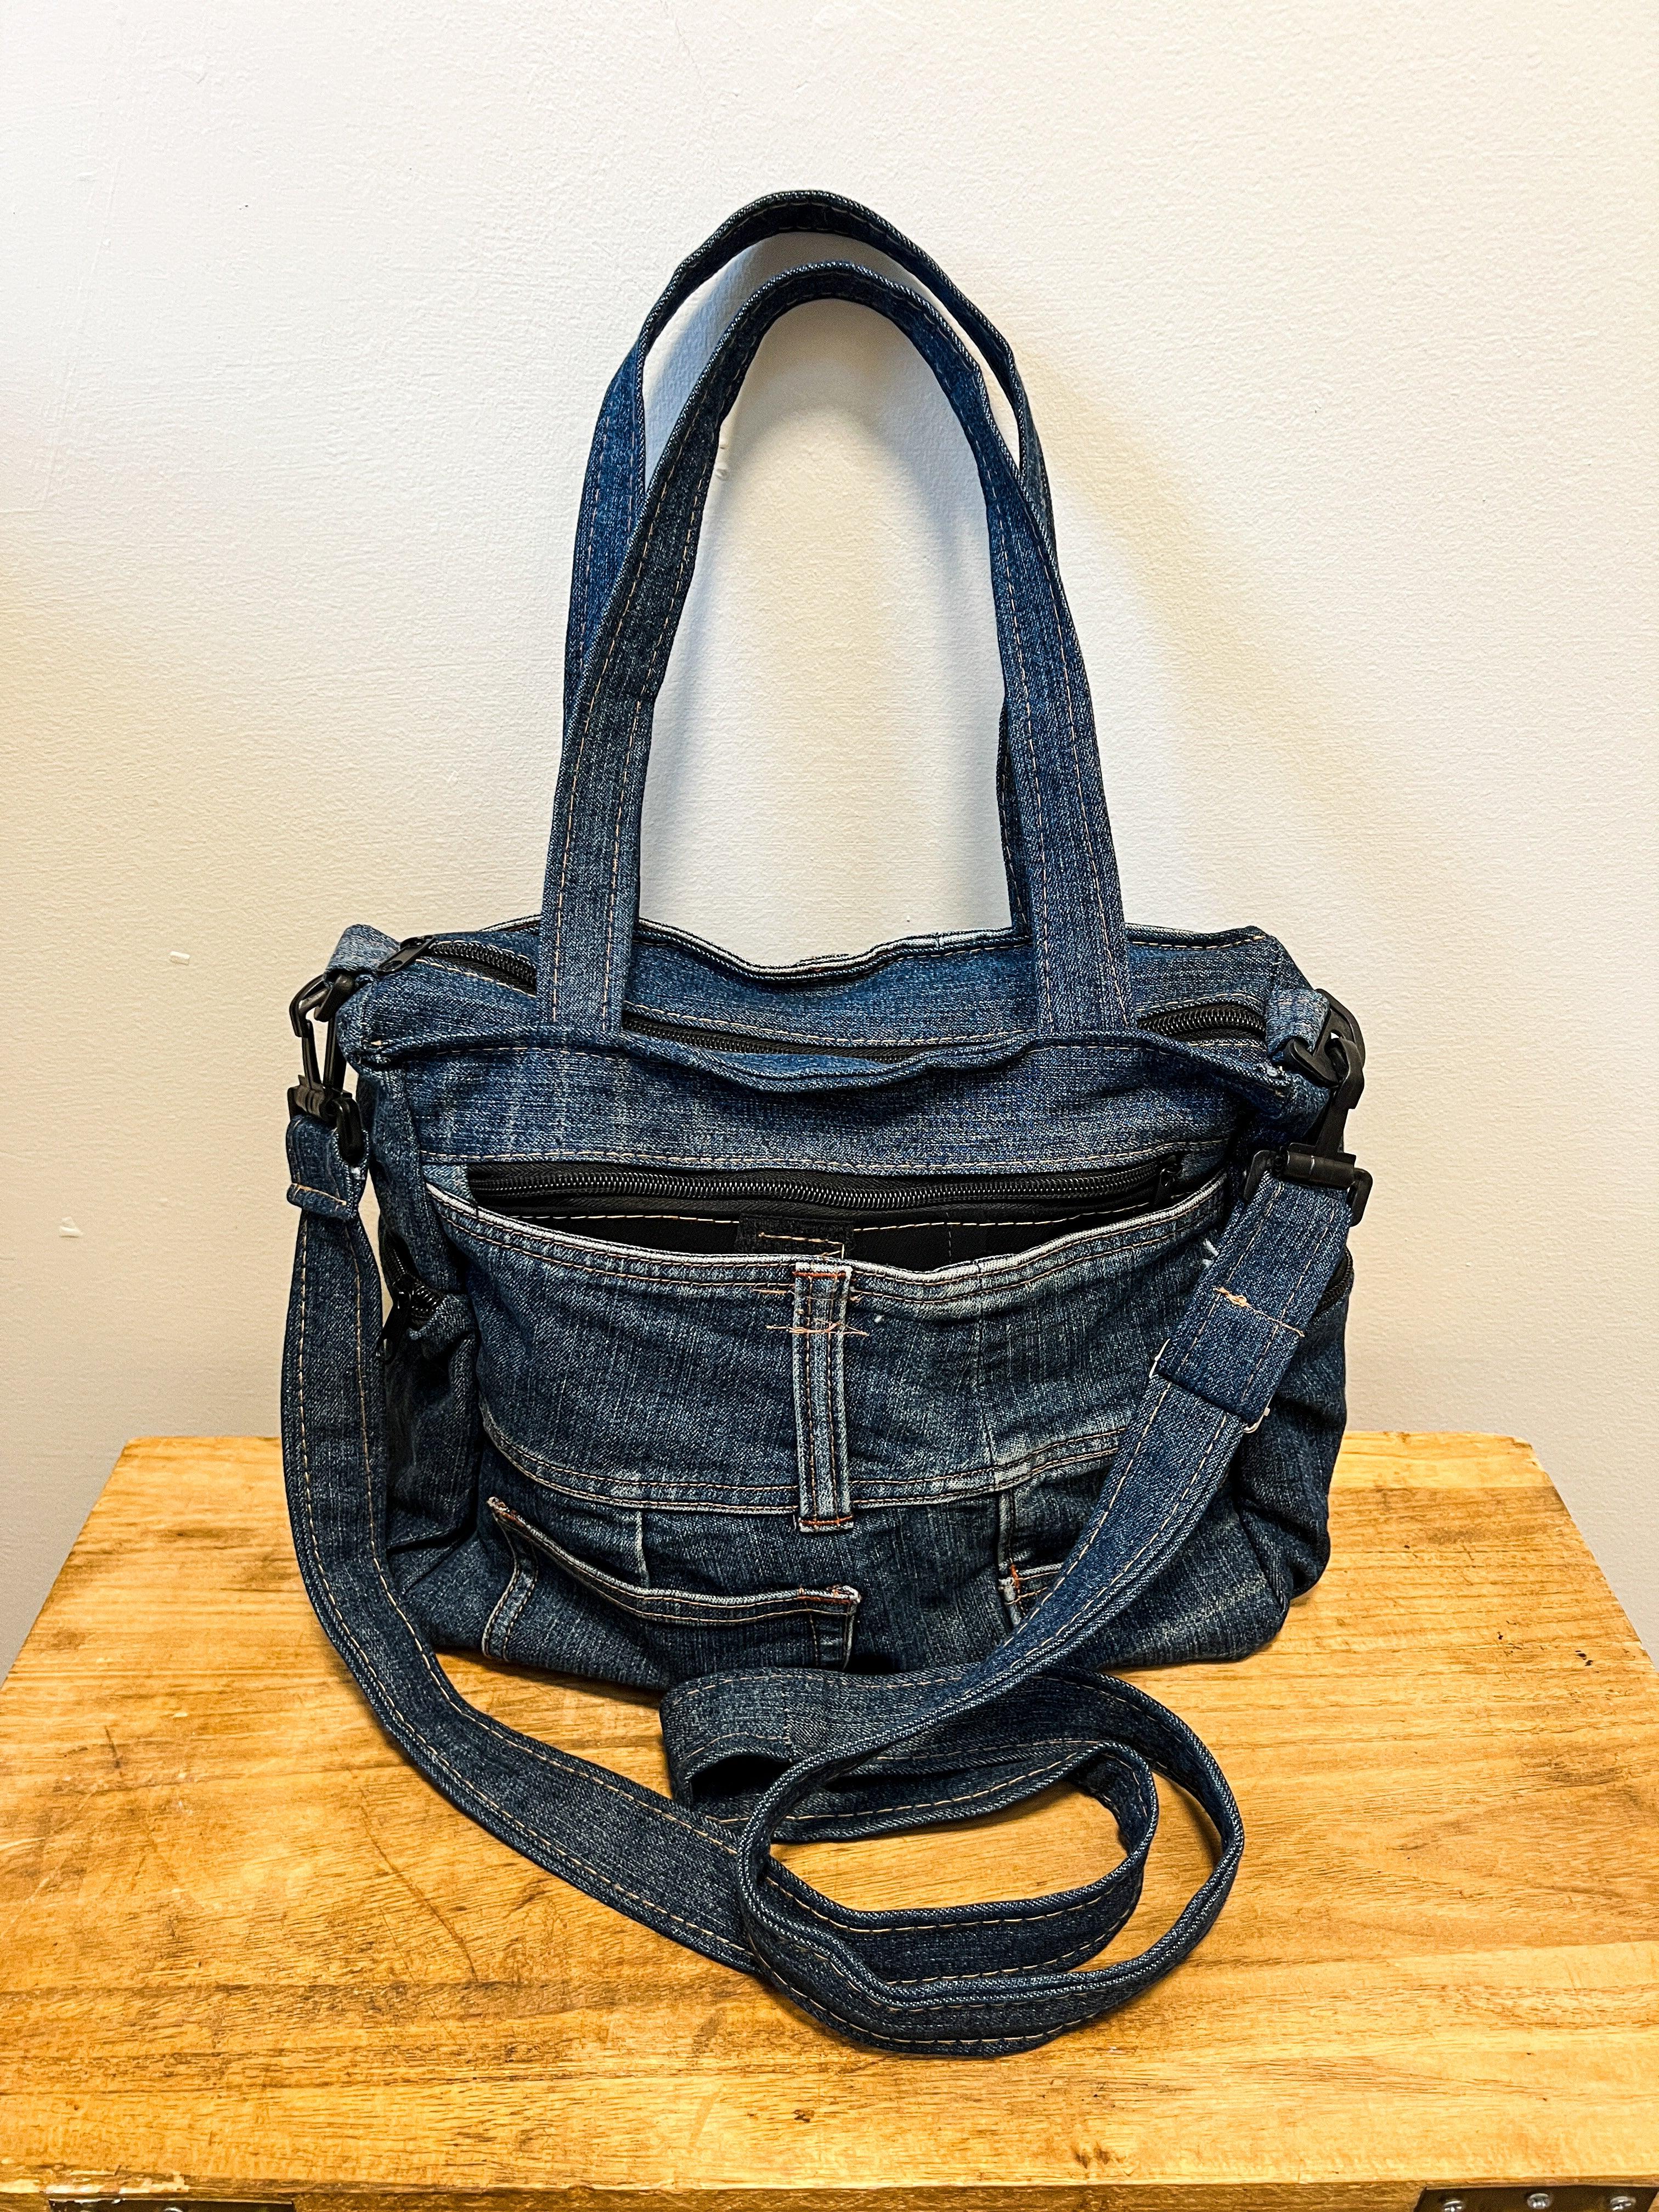 The Beach Bag – a recycled and pimped up bag from an old pair of jeans |  maRRose CCC